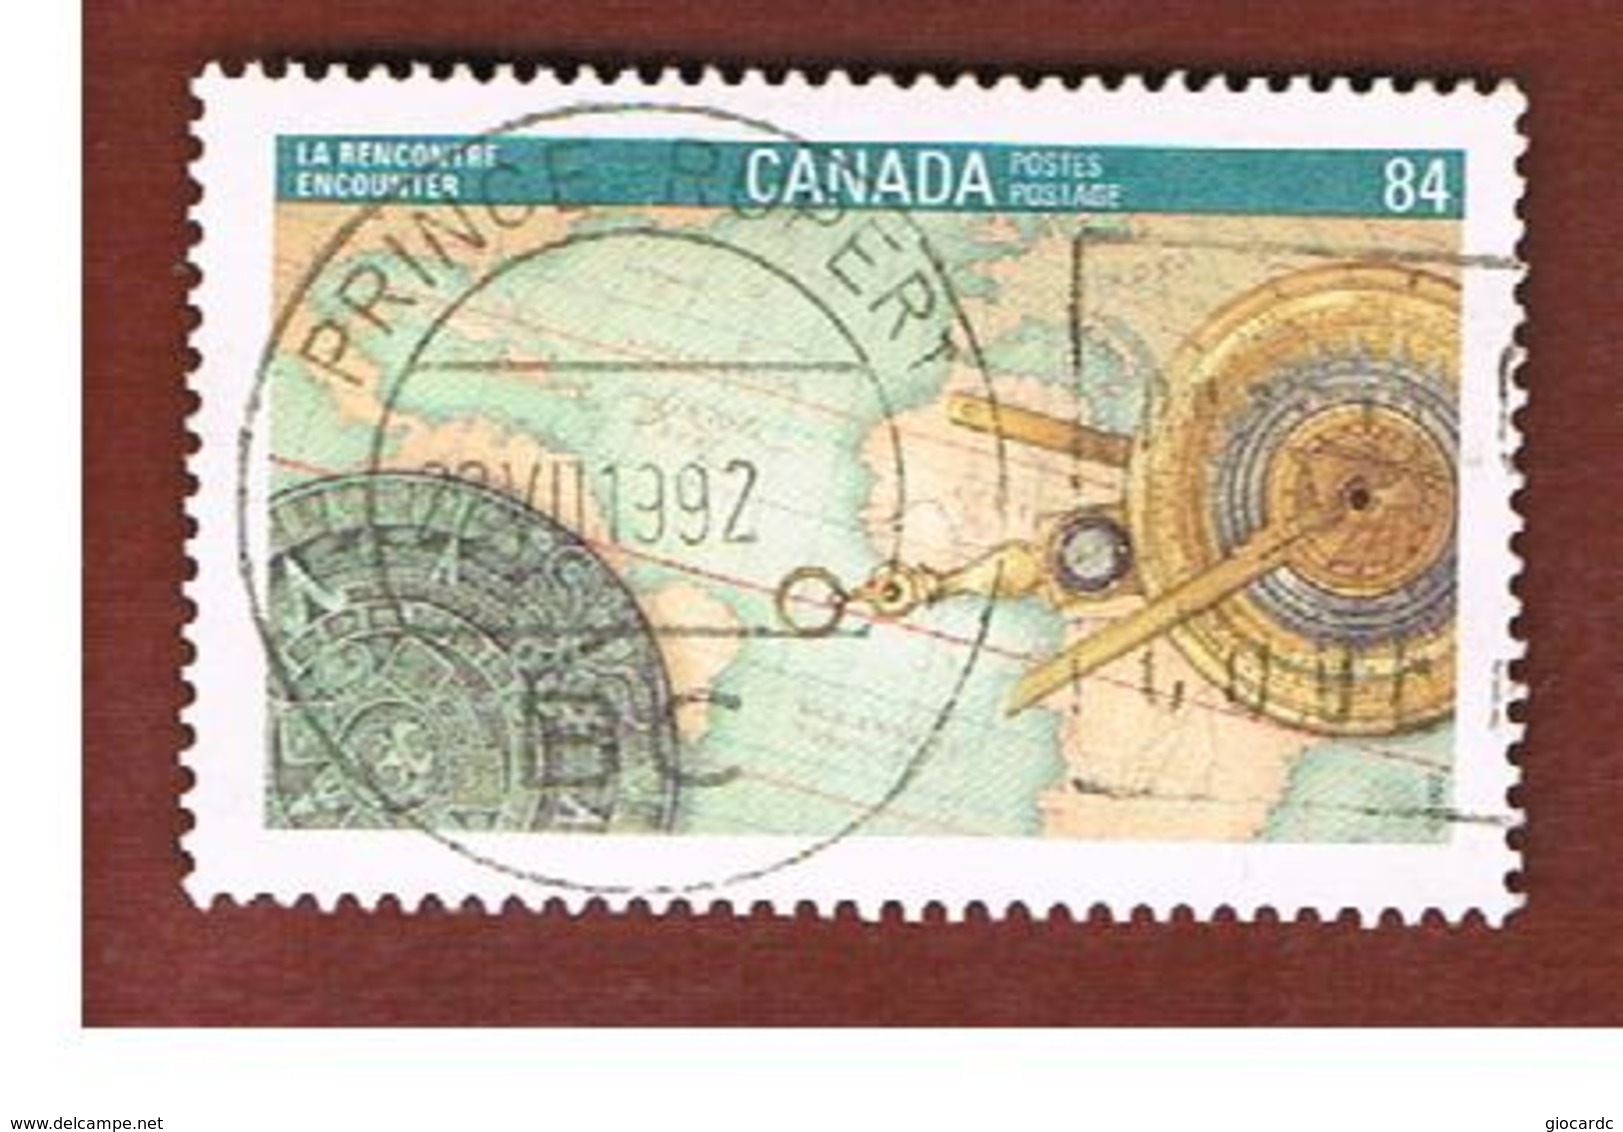 CANADA - SG 1490  - 1992 PHILATELIC EXHIBITION CANADA '92: ENCOUNTER   -  USED - Used Stamps